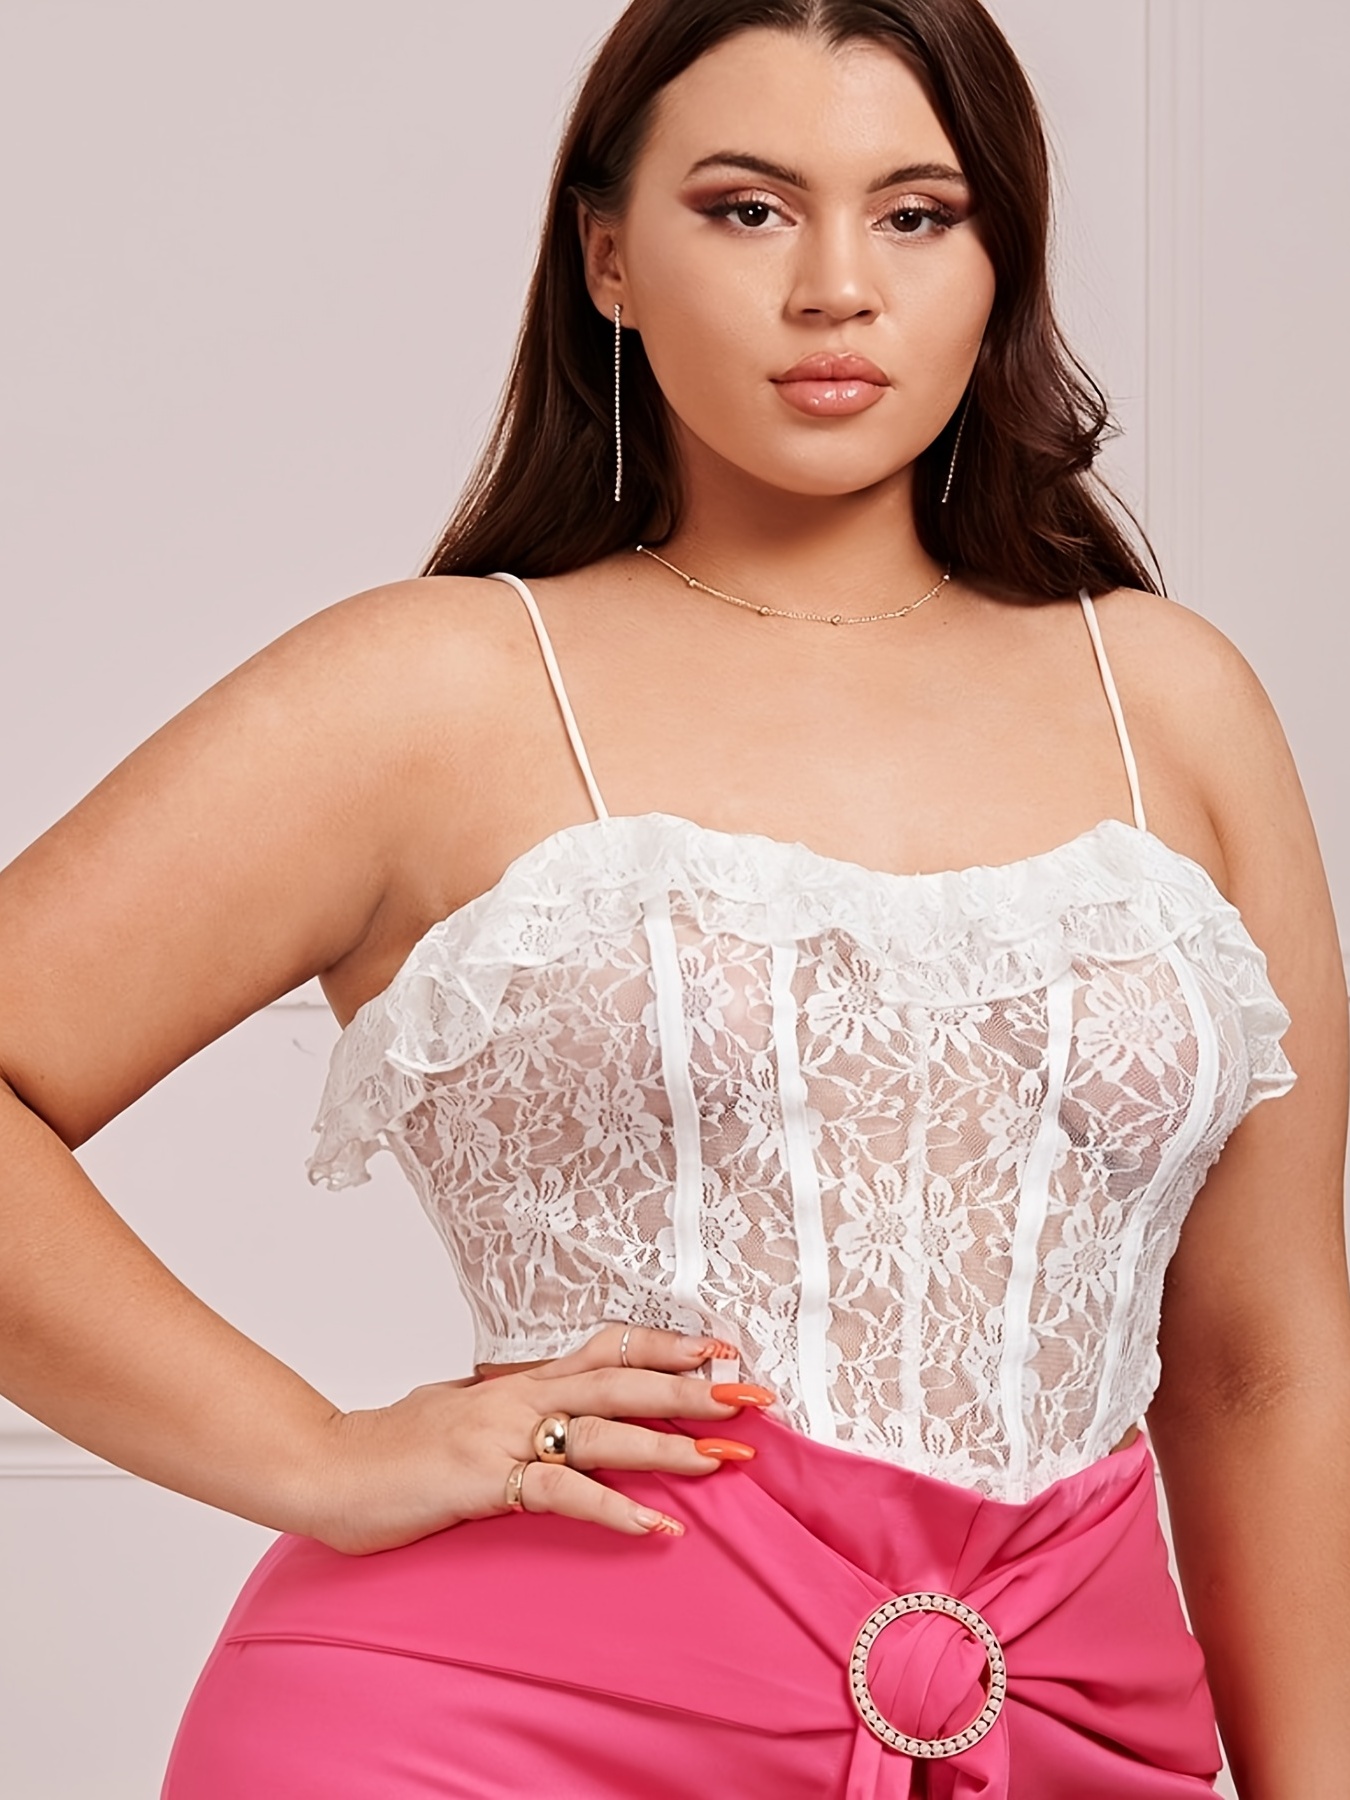 White Sheer Lace Cami Top